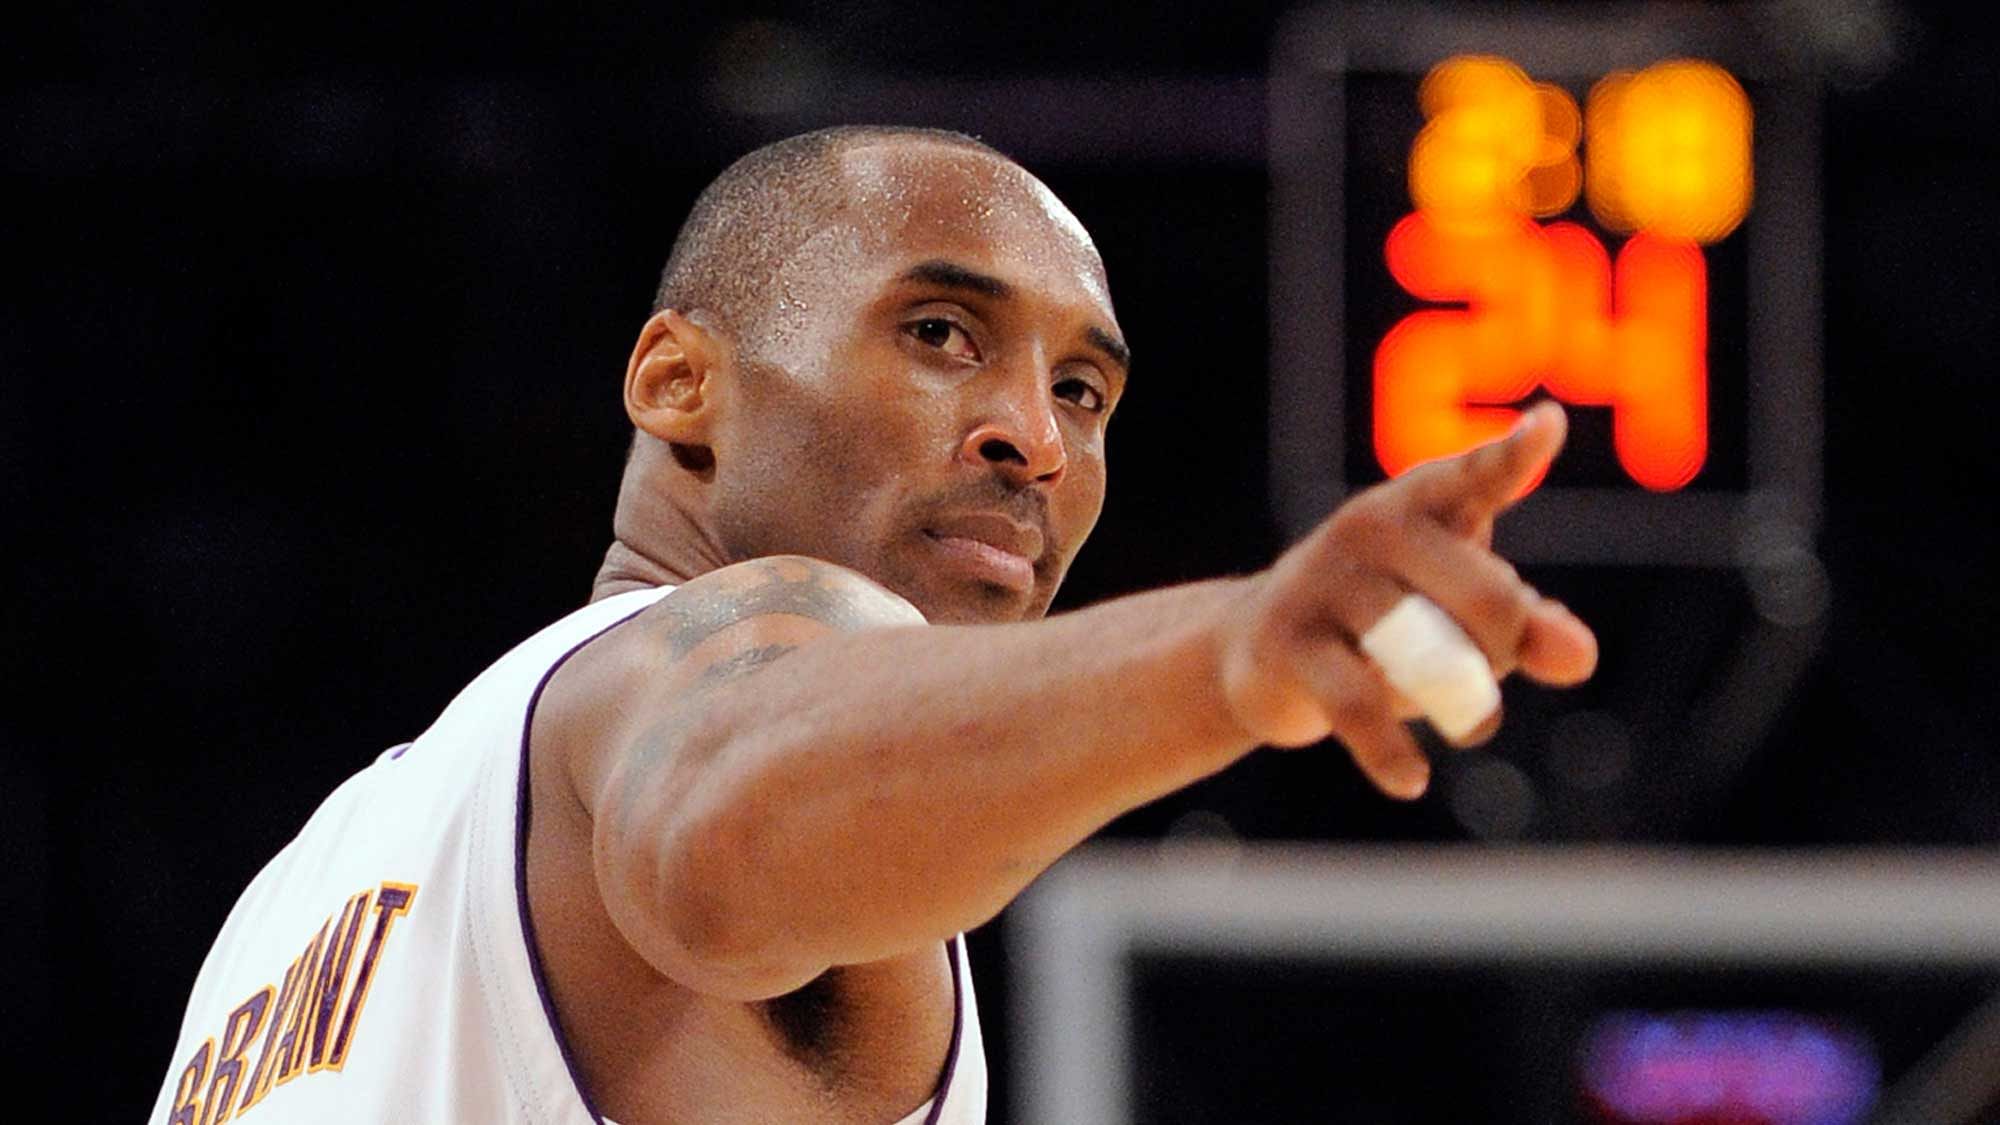 Kobe Bryant will play his career’s final NBA match on Thursday morning(IST). (Photo: AP)